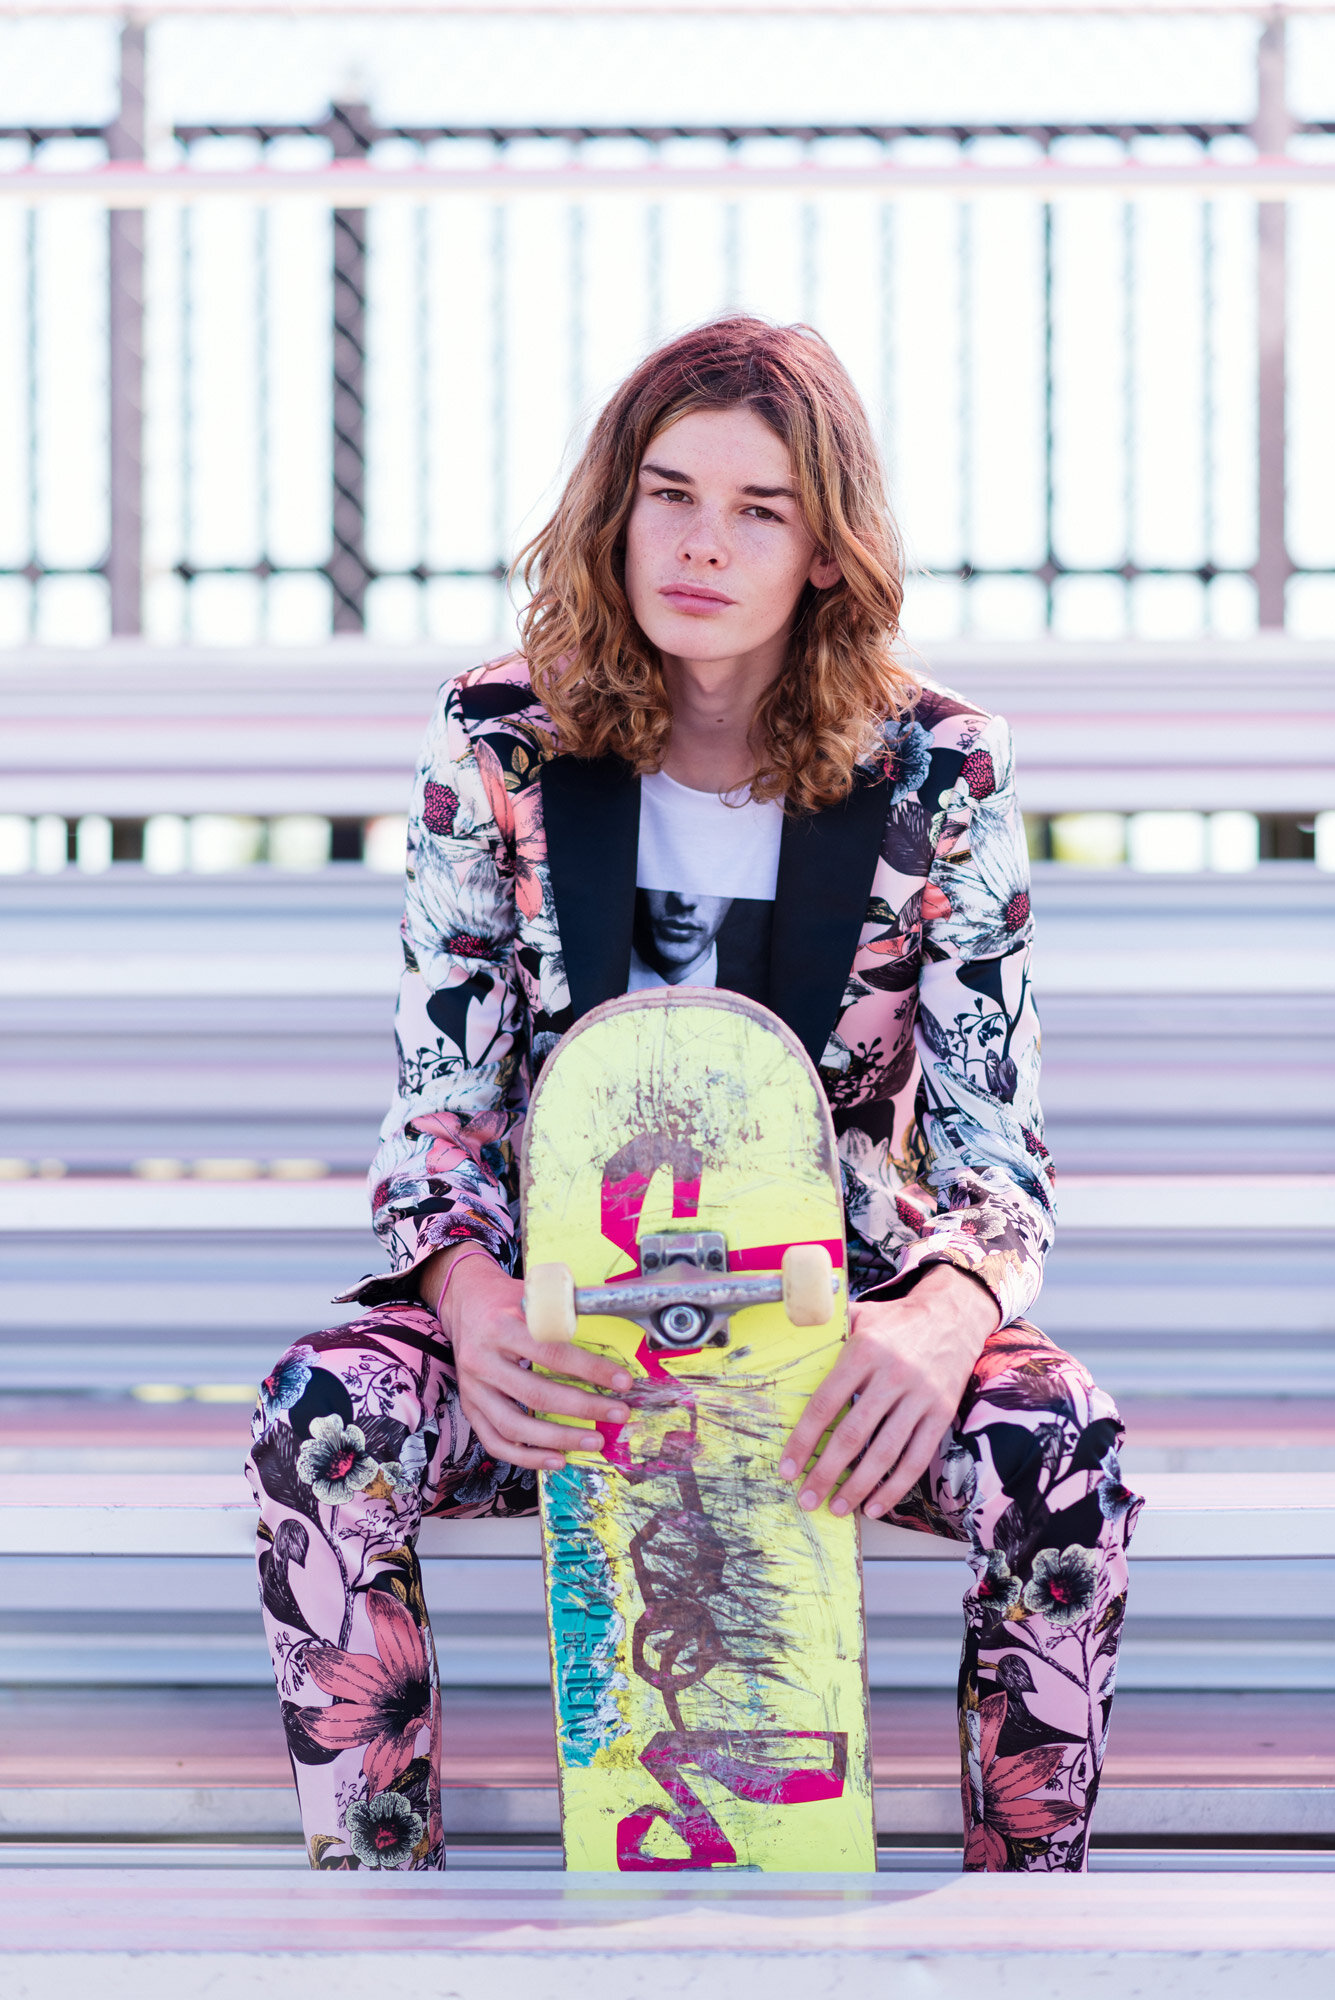 Men's outdoor skate park lifestyle fashion shoot in Dallas, Texas. — Dallas  Texas Commercial, Advertising and Lifestyle Photographer Jami Clayman